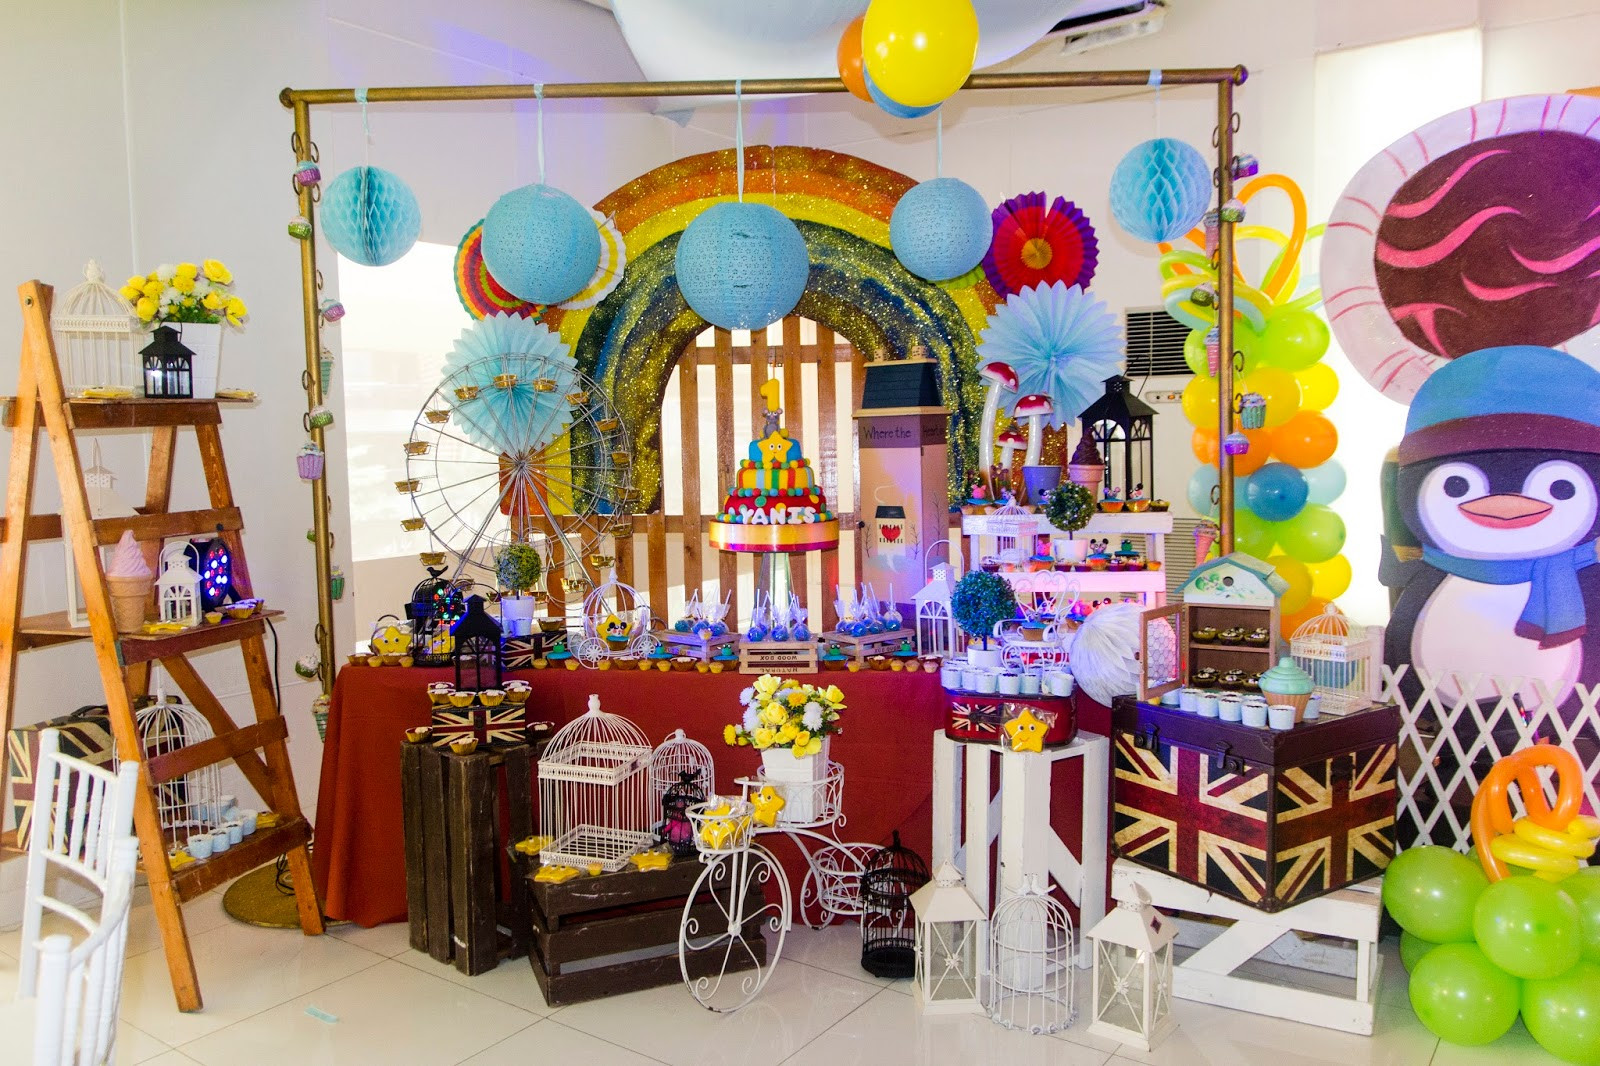 Little Baby Bum Birthday Party
 Wanting To Have My Little Boy s First Birthday Party